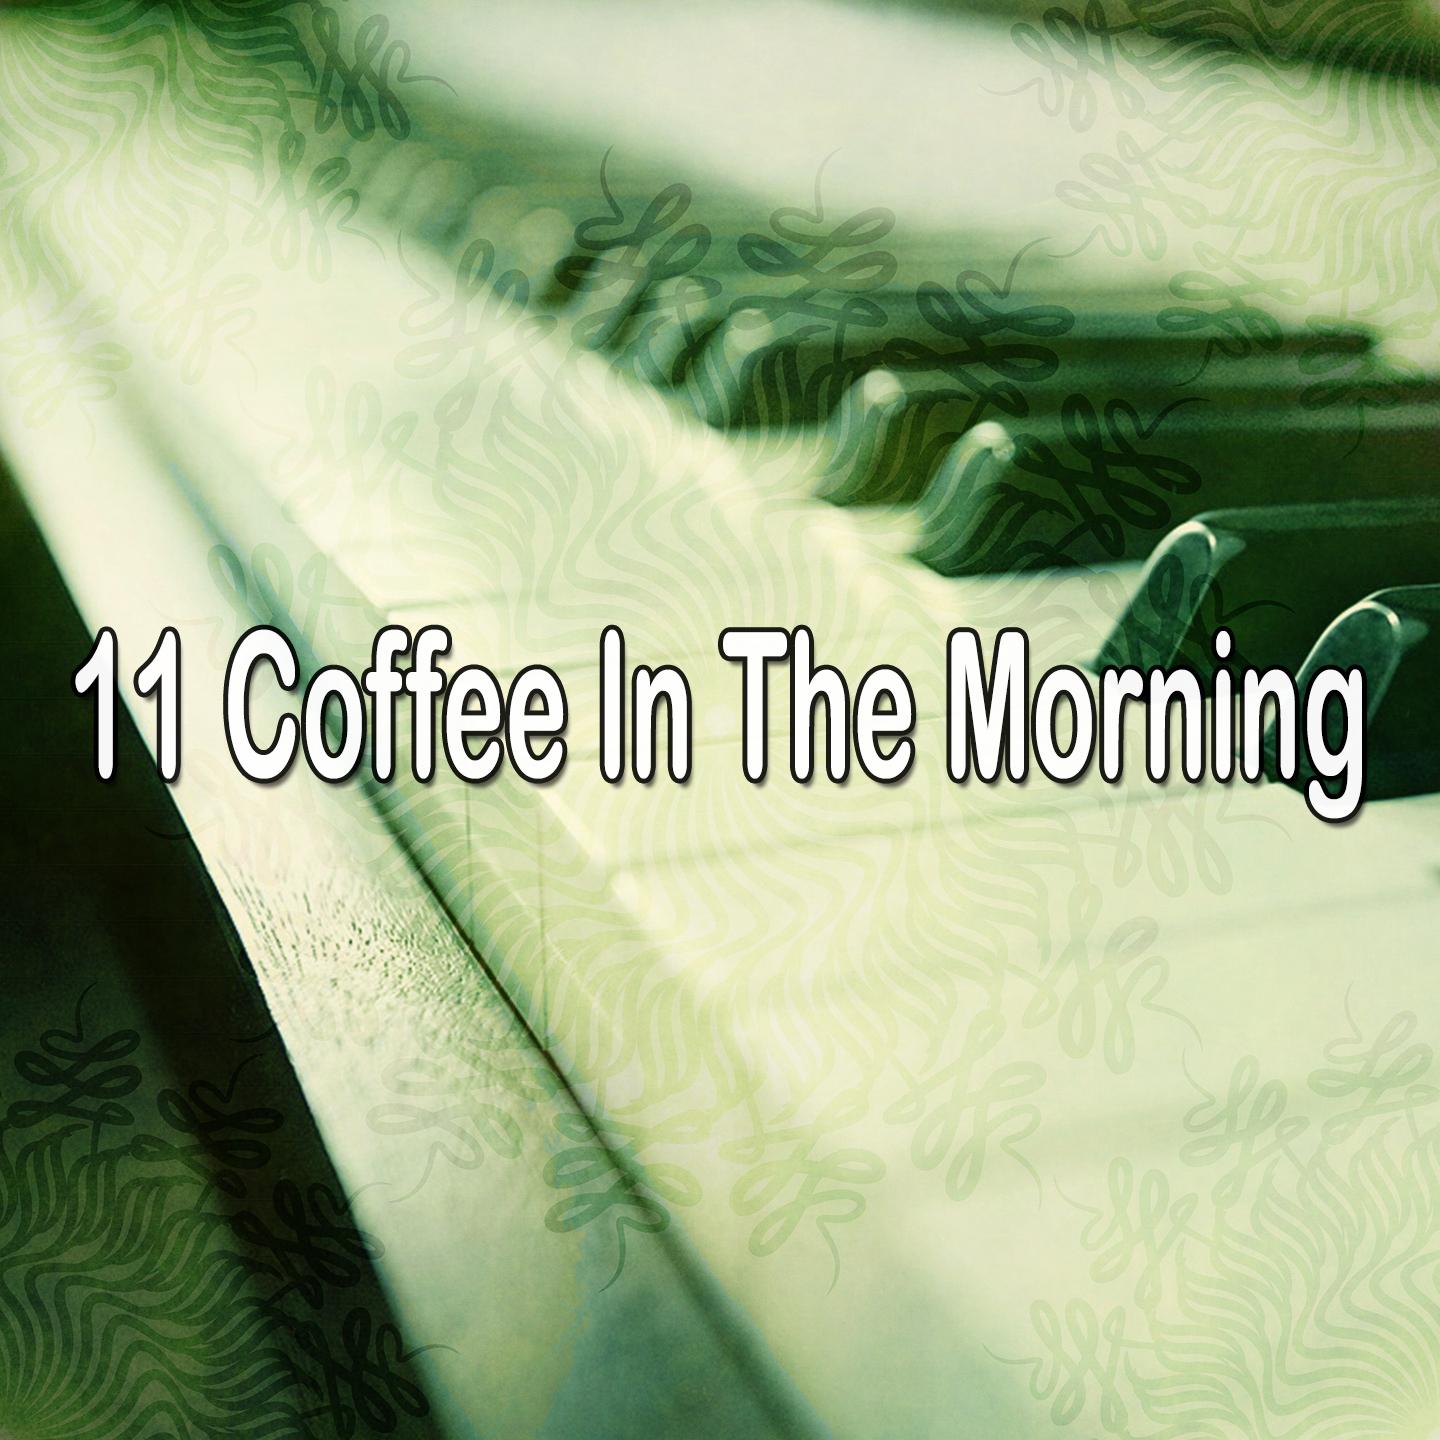 11 Coffee in the Morning